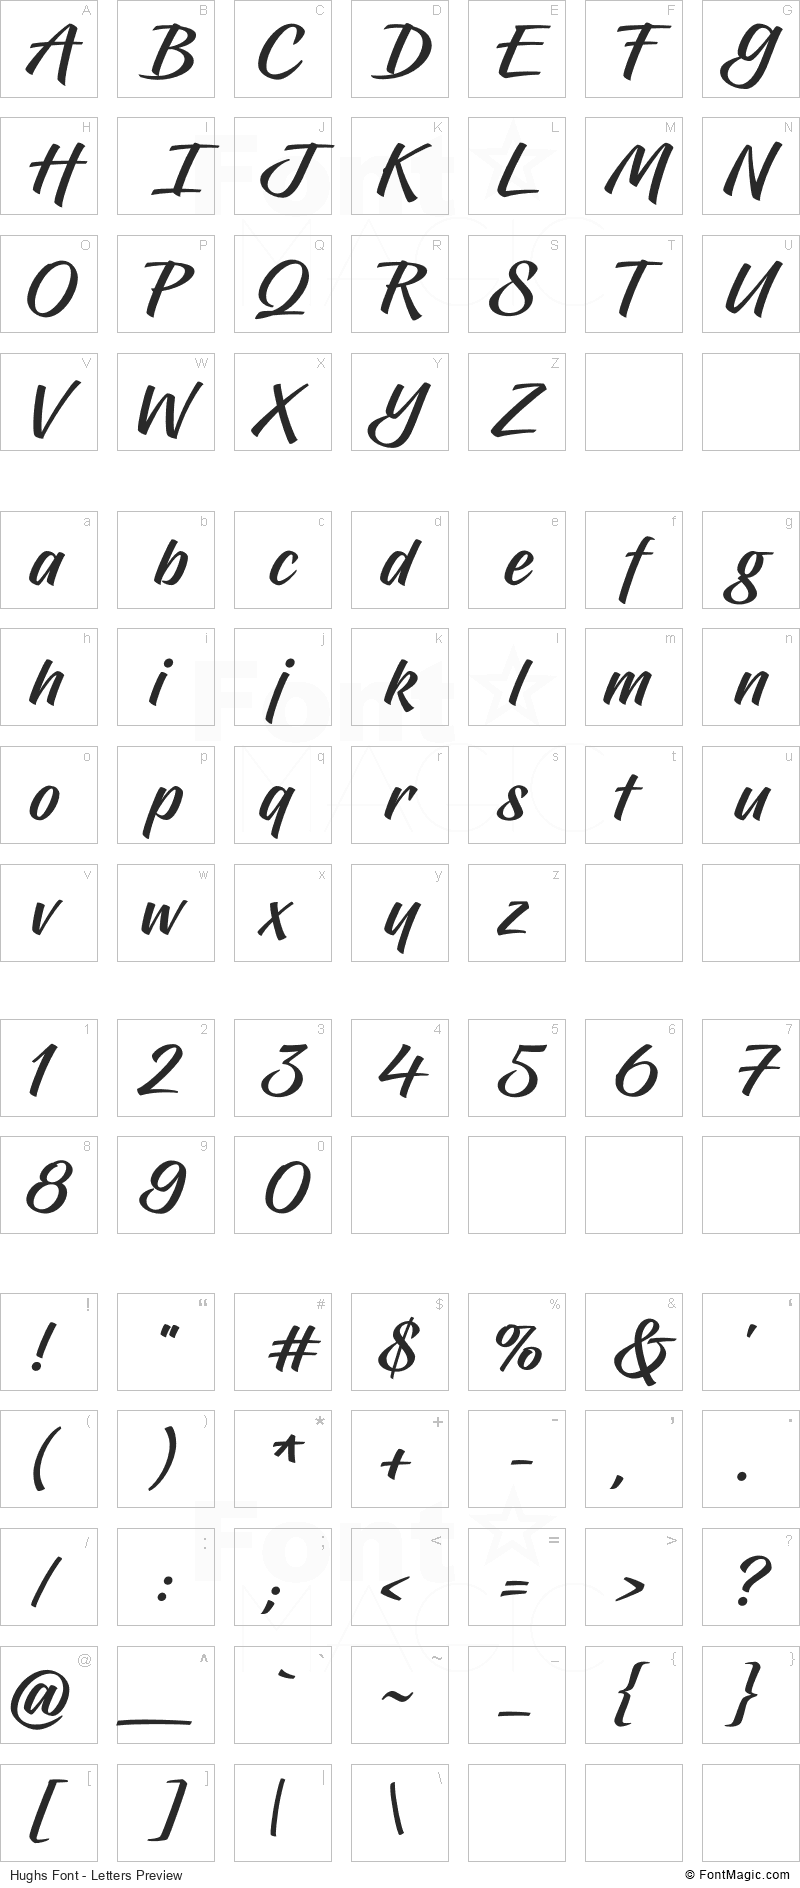 Hughs Font - All Latters Preview Chart